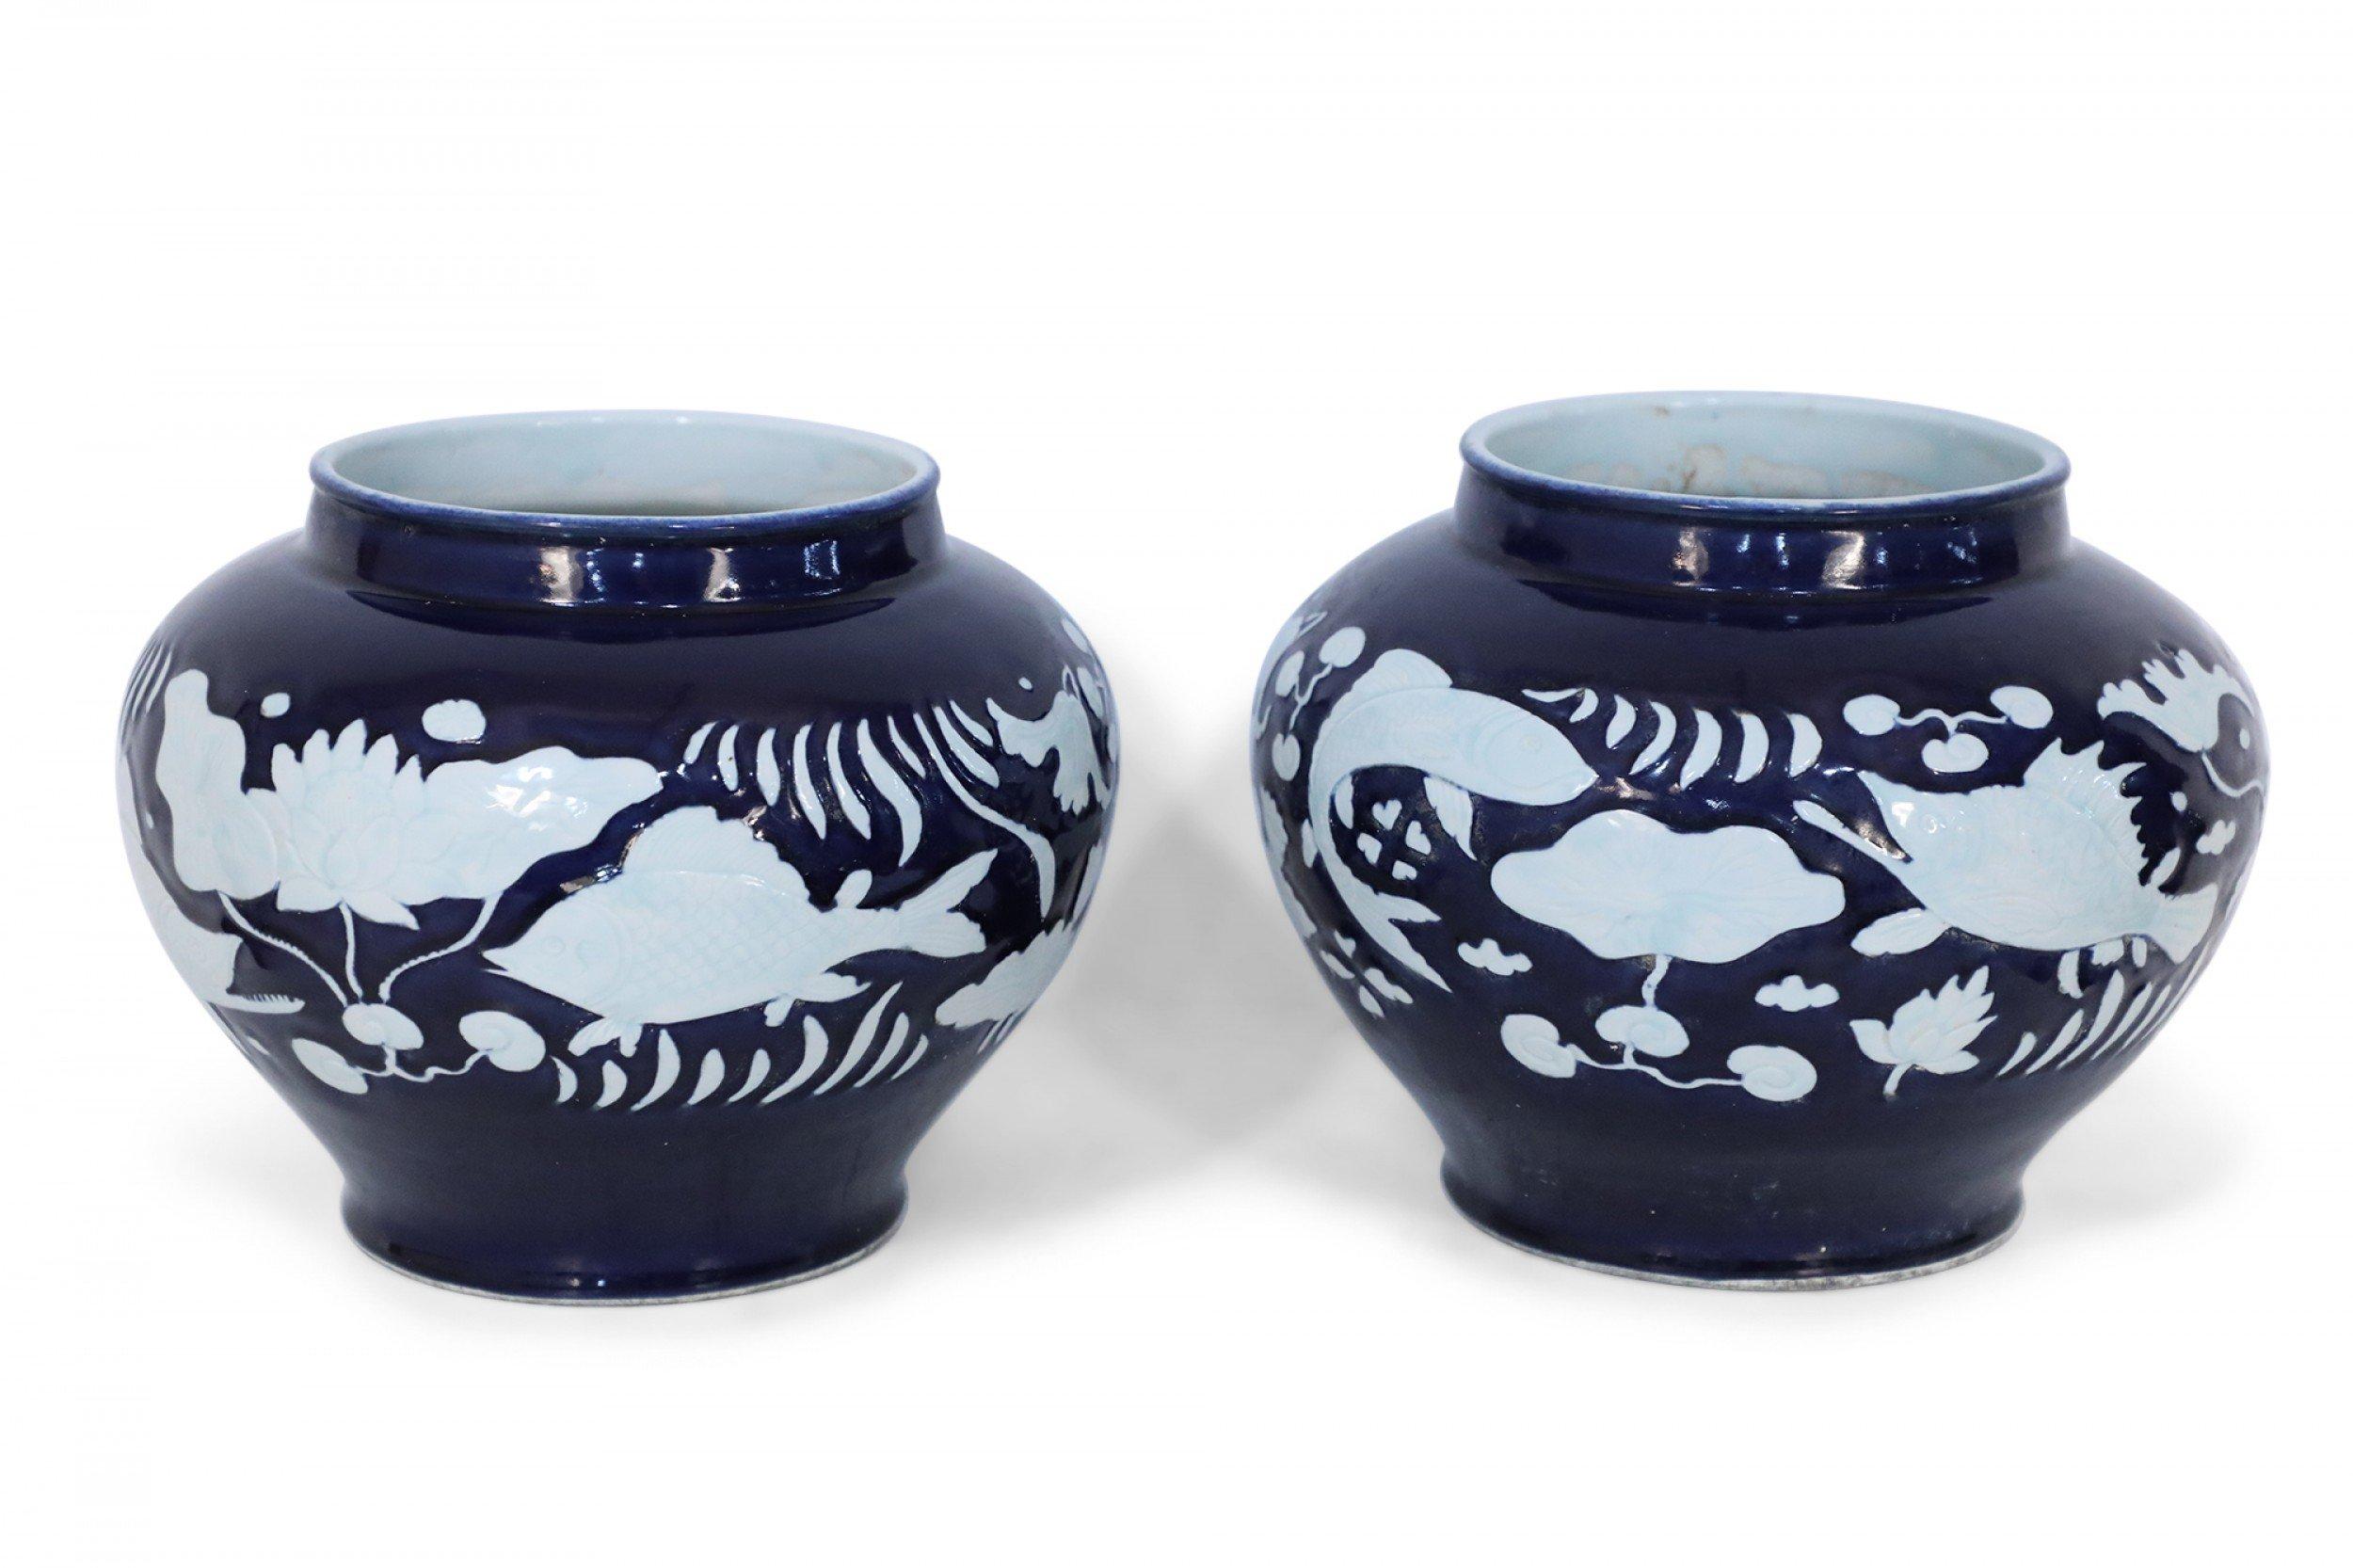 Pair of Chinese porcelain pots in dark navy hues decorated with white underwater motifs capturing the silhouettes of fish and vegetation (PRICED AS PAIR).
 